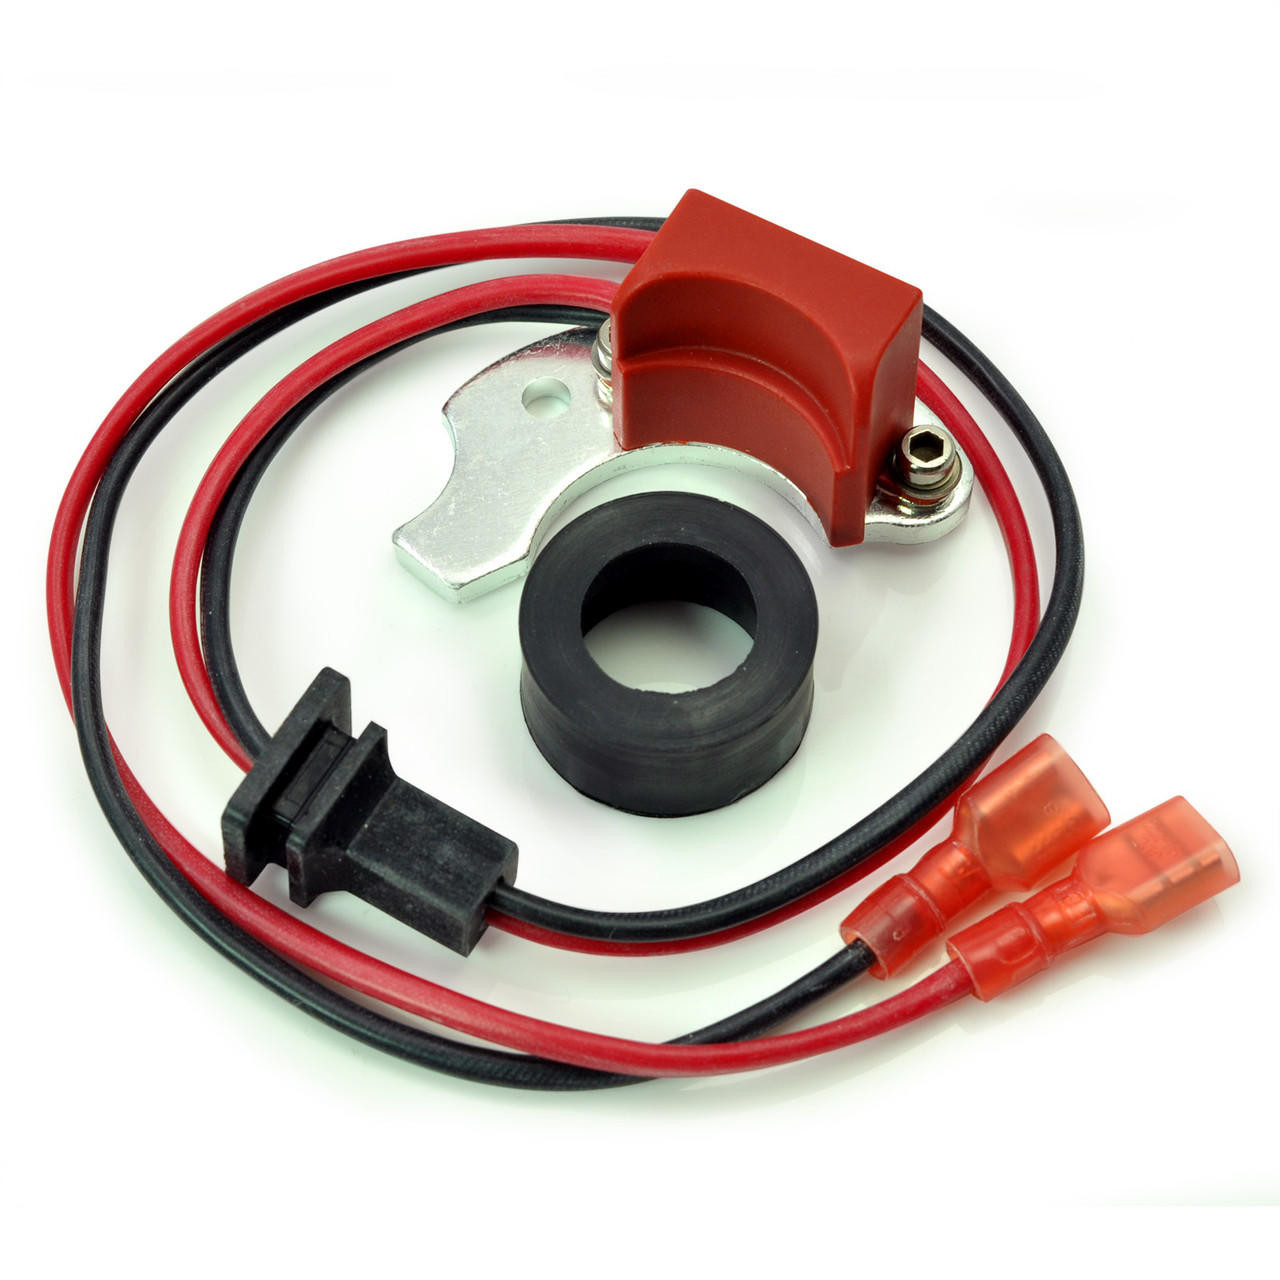  Powerspark Electronic Ignition Kit for Powerspark D13 Distributor ONLY (K43)